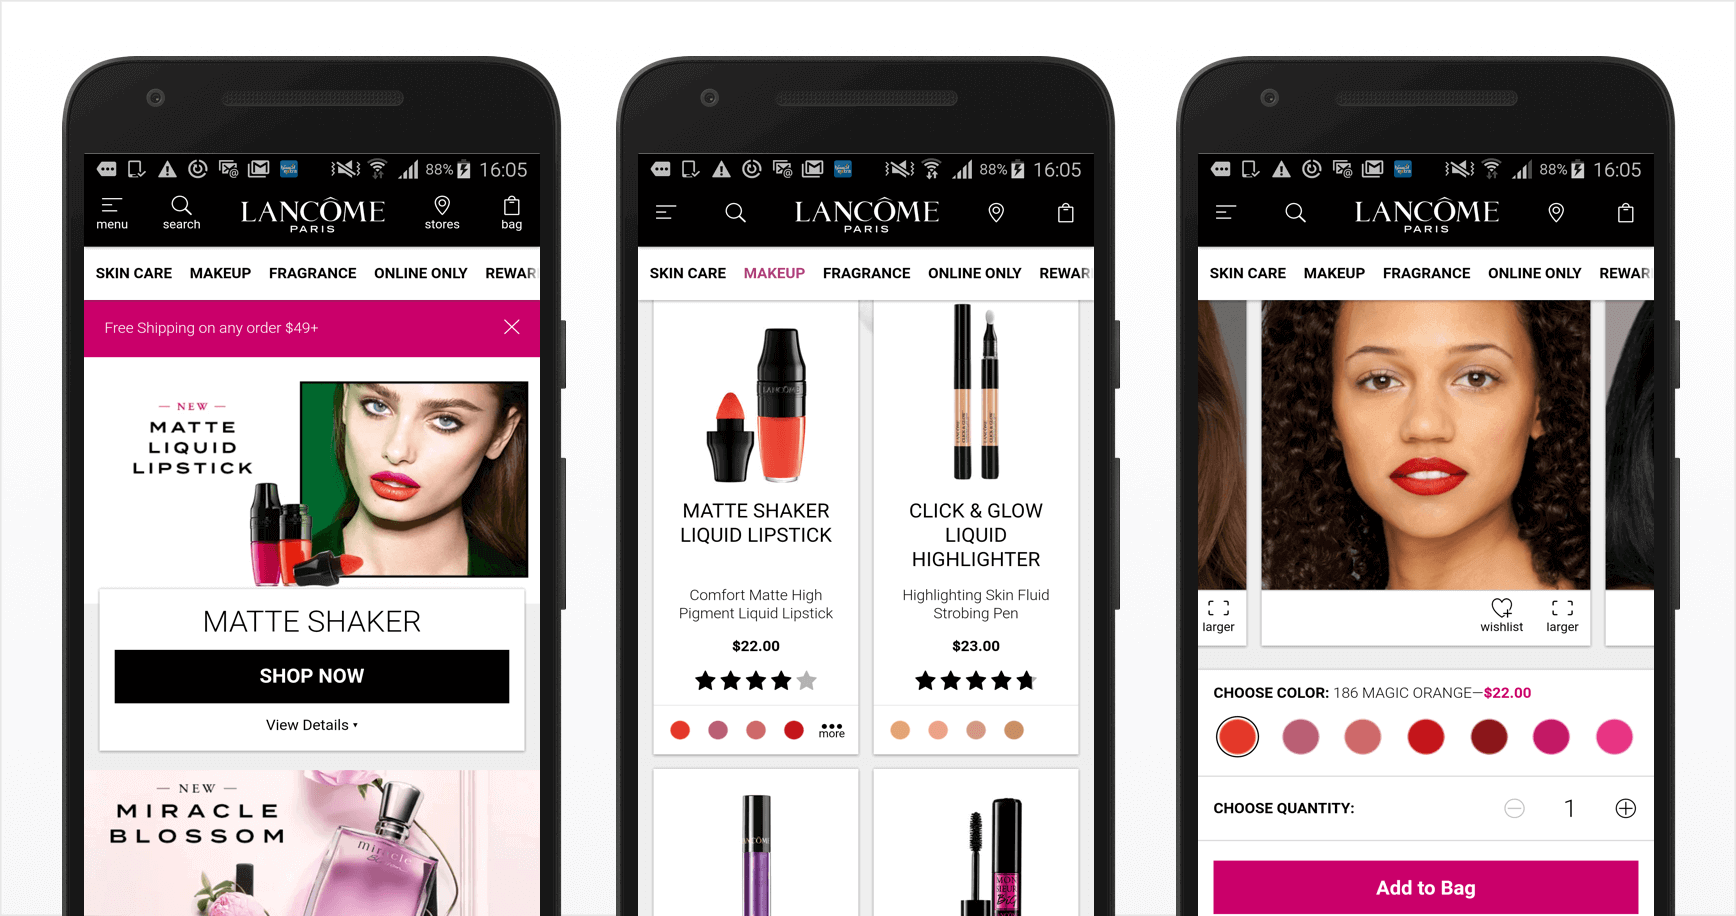 Lancôme's PWA storefront features mobile-friendly and good UX